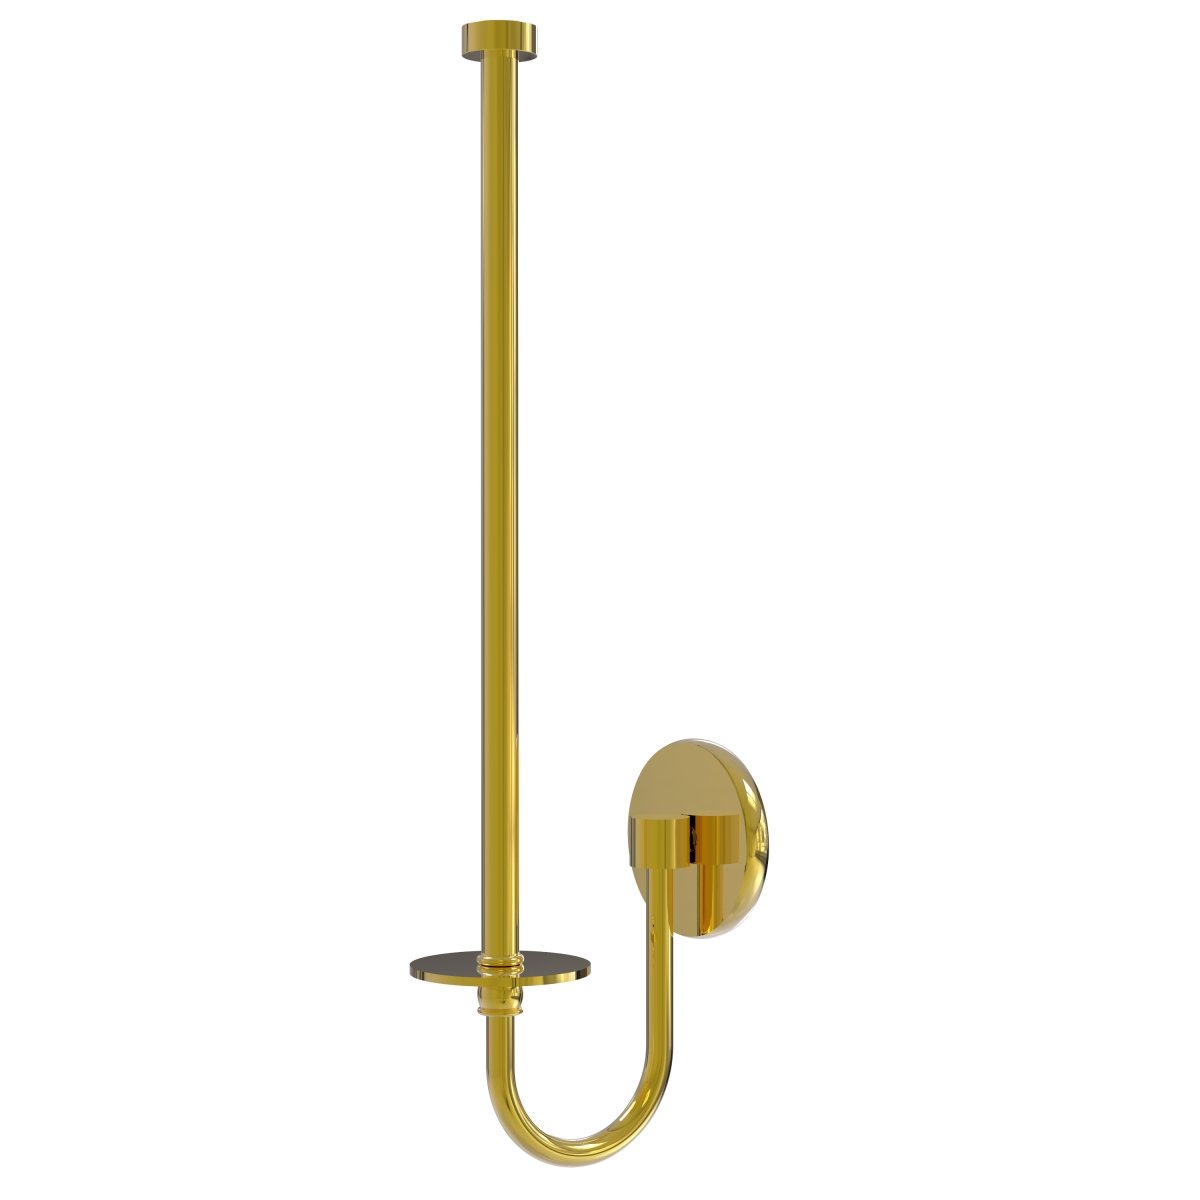 1025u-unl Skyline Collection Wall Mounted Paper Towel Holder, Unlacquered Brass